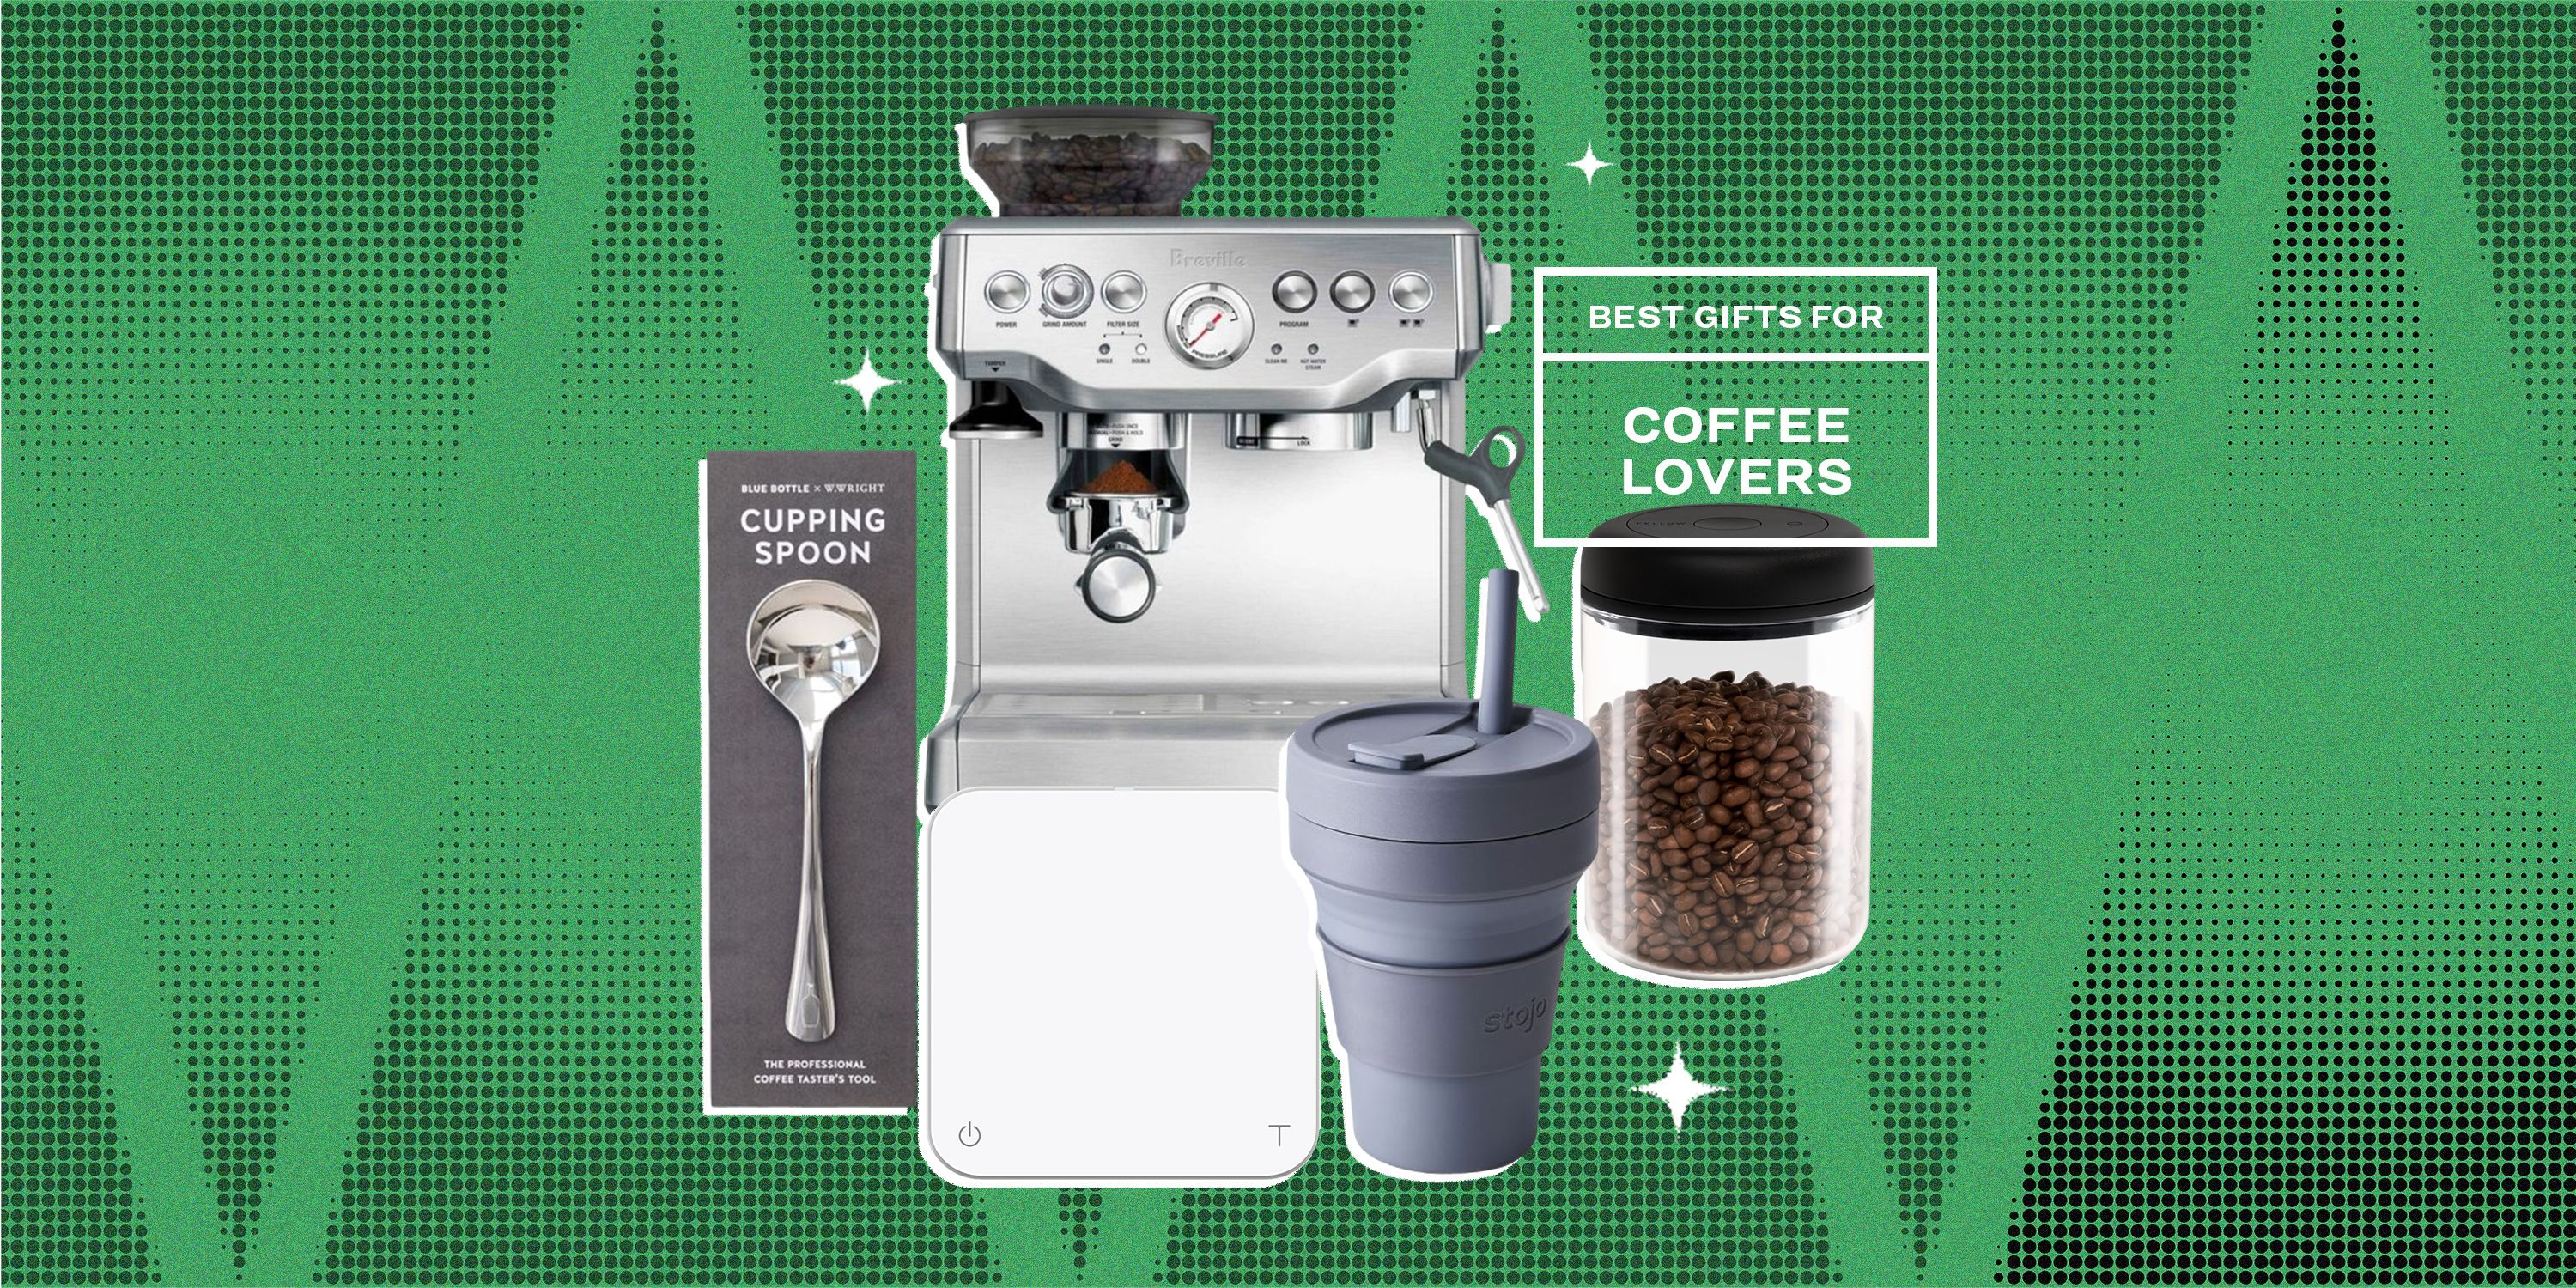 https://hips.hearstapps.com/hmg-prod.s3.amazonaws.com/images/con-22-043-web-gift-guide-coffee-lovers-refresh-1669216542.jpg